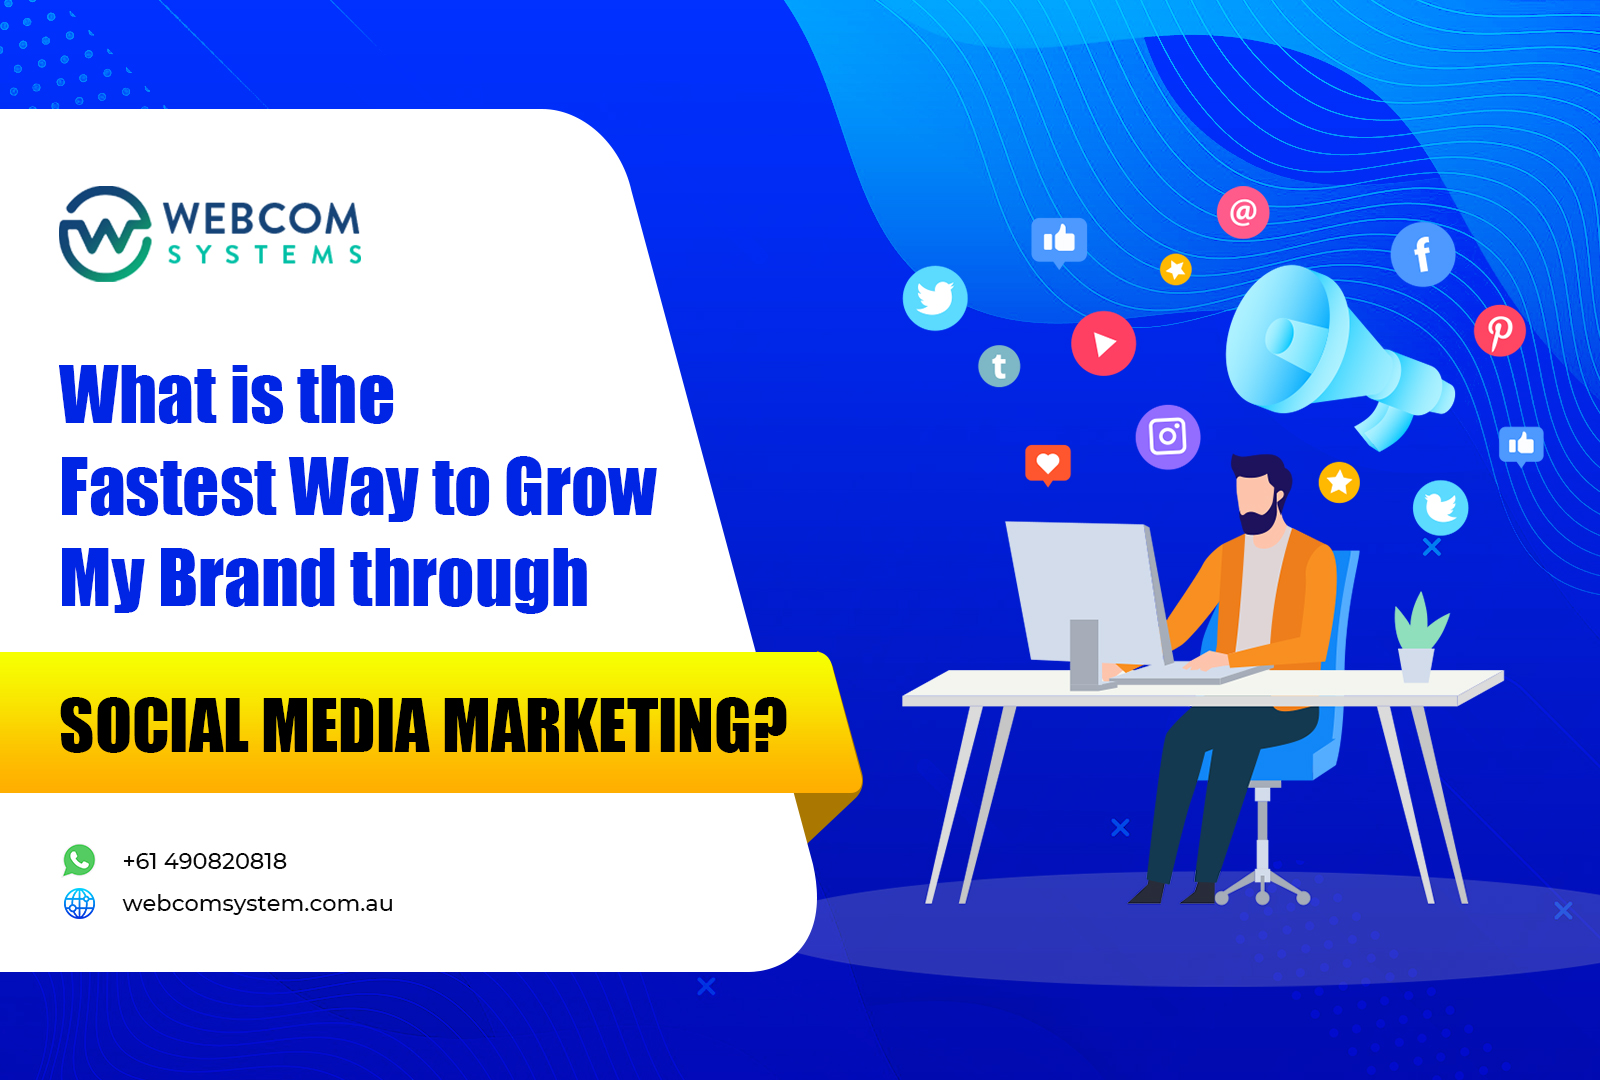 What is the Fastest Way to Grow My Brand through Social Media Marketing?